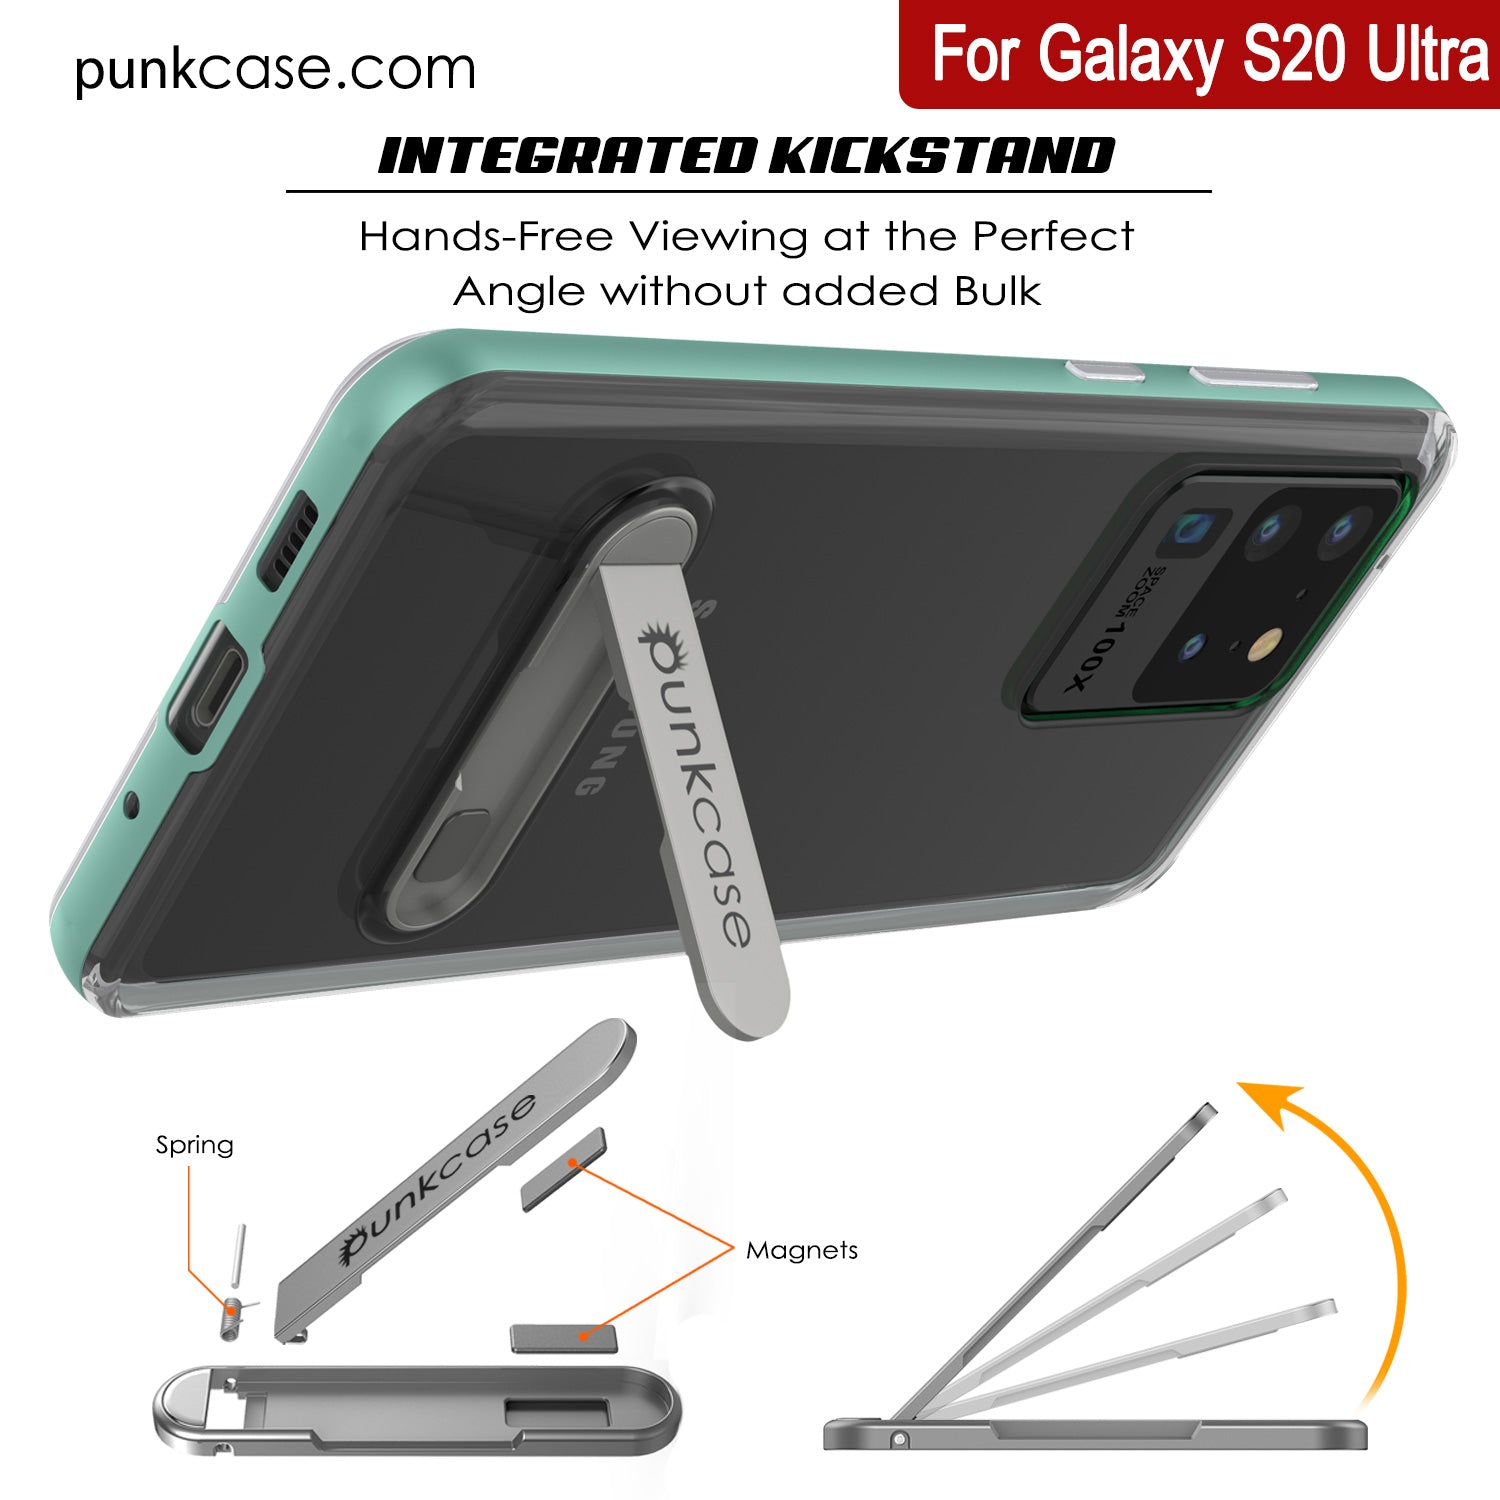 Galaxy S20 Ultra Case, PUNKcase [LUCID 3.0 Series] [Slim Fit] Armor Cover w/ Integrated Screen Protector [Teal]